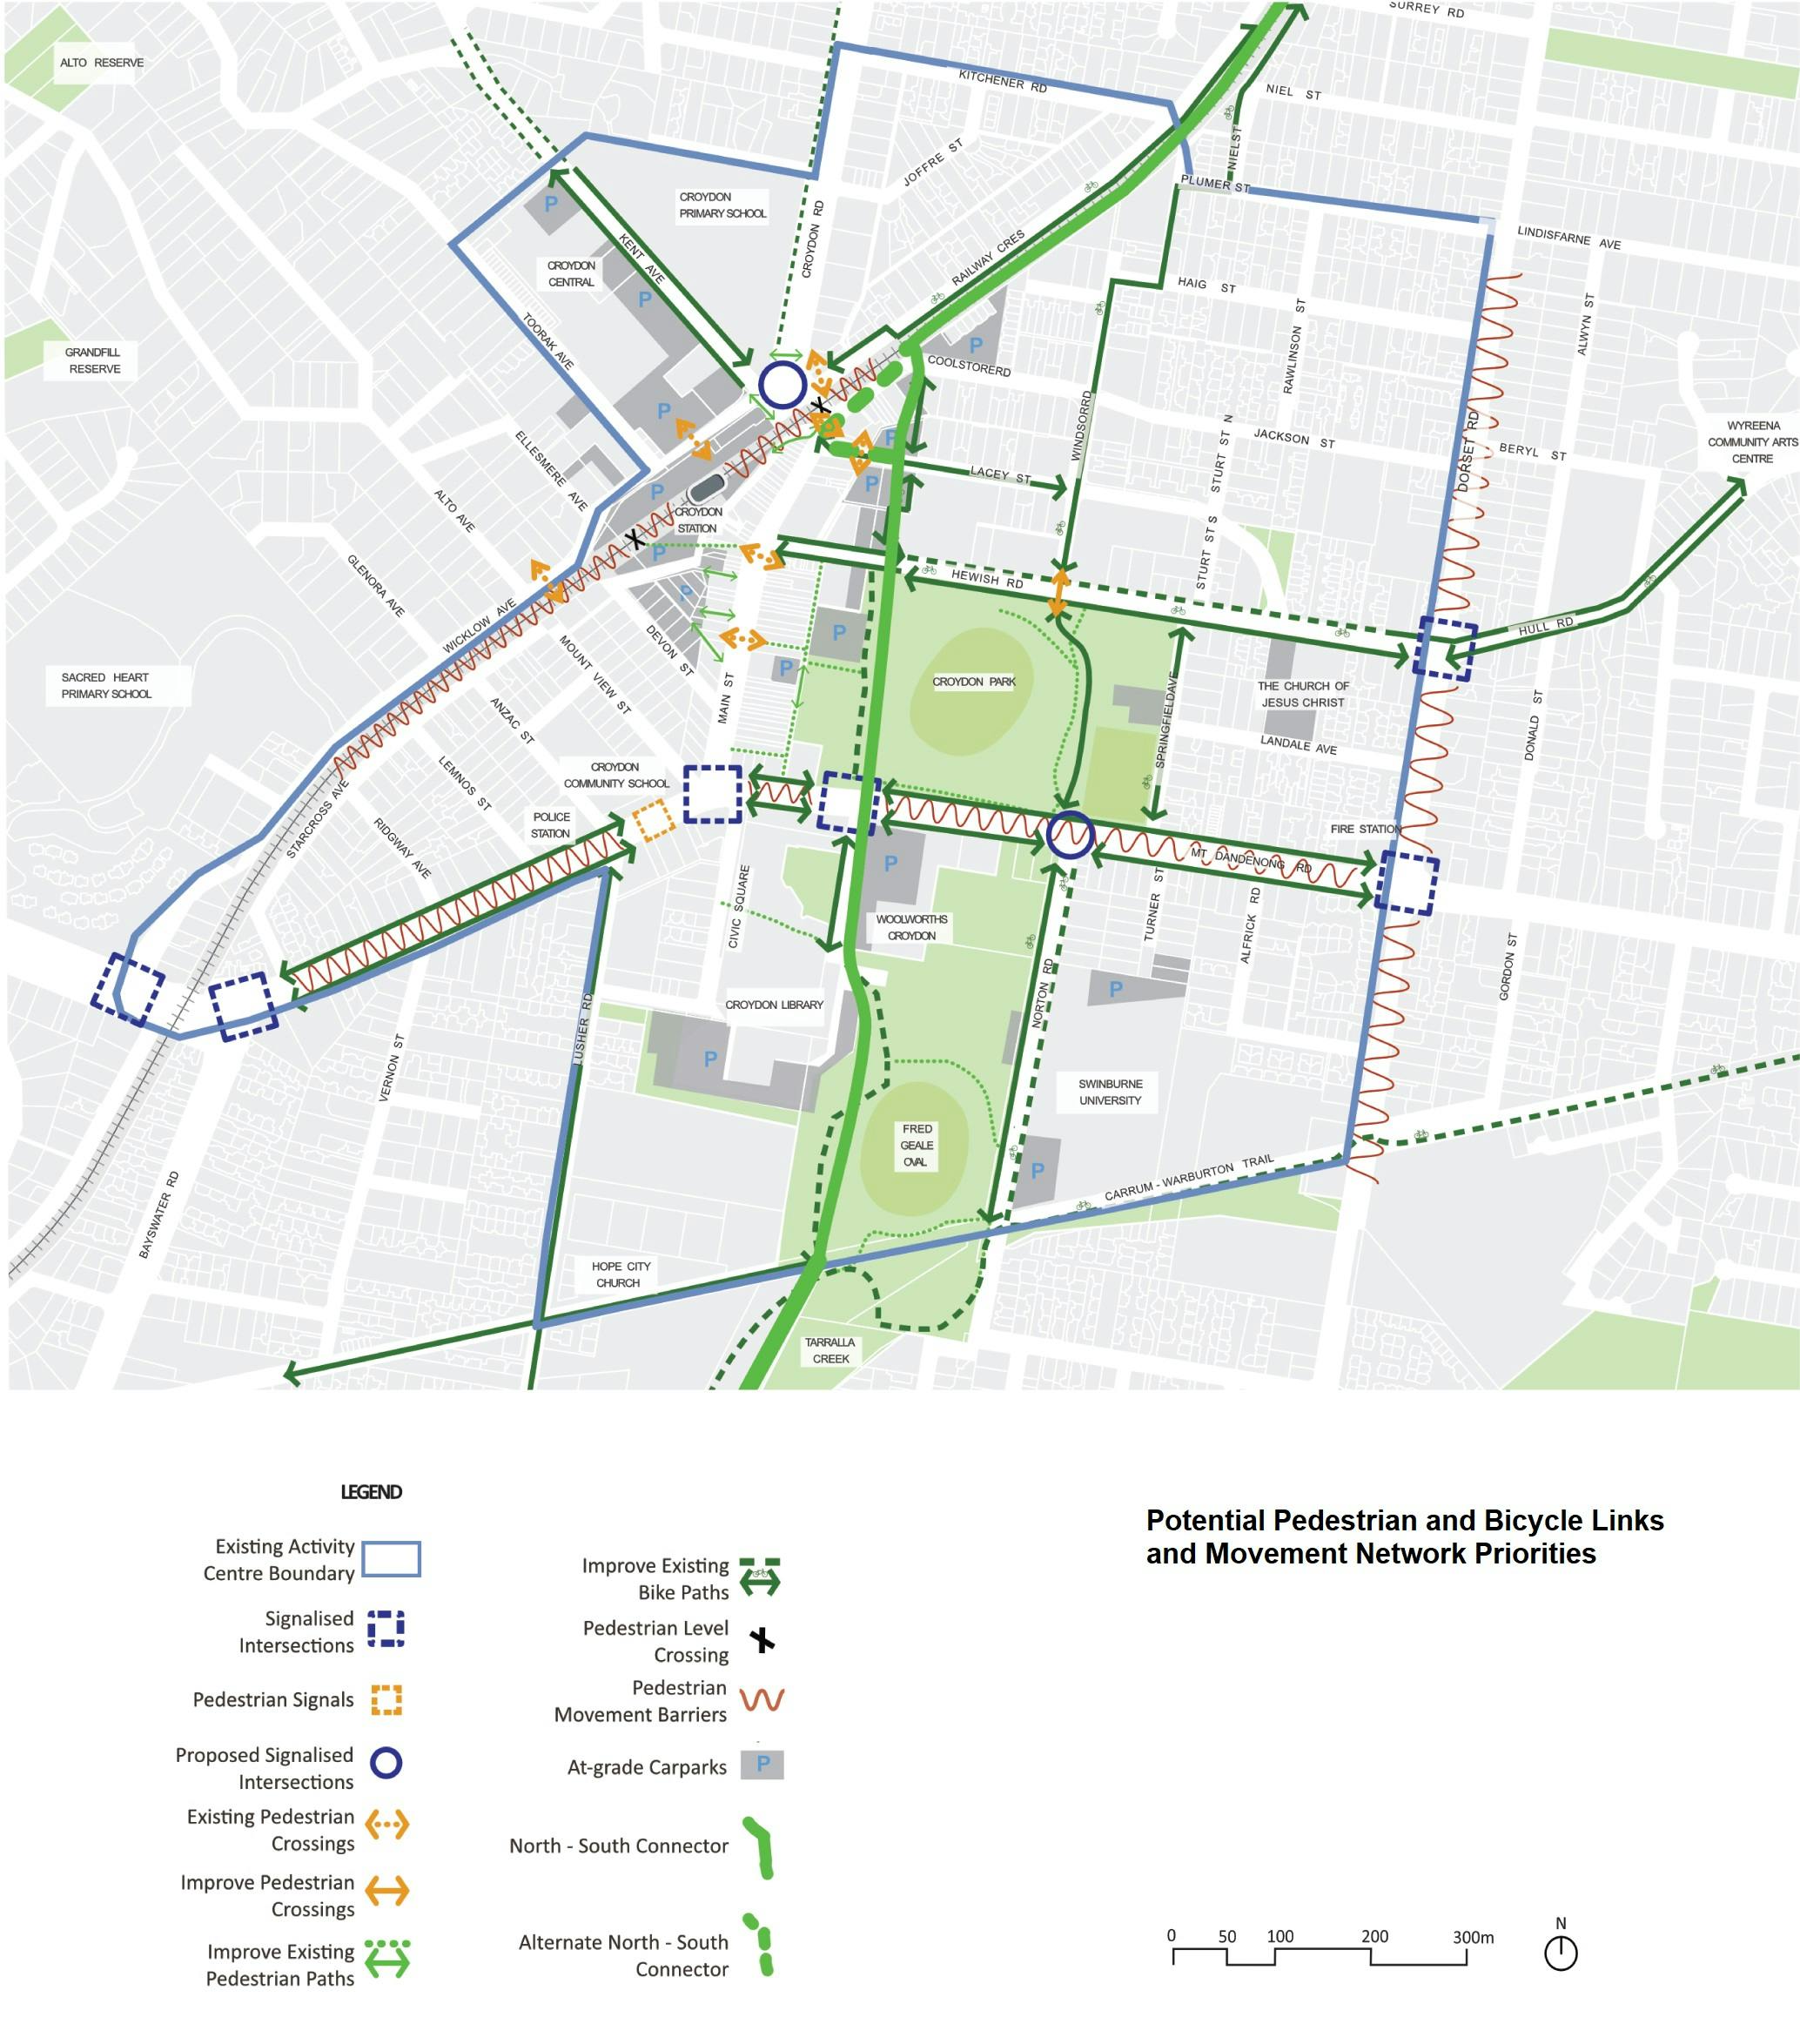 Potential Pedestrian Bicycle and Movement Network Priorities